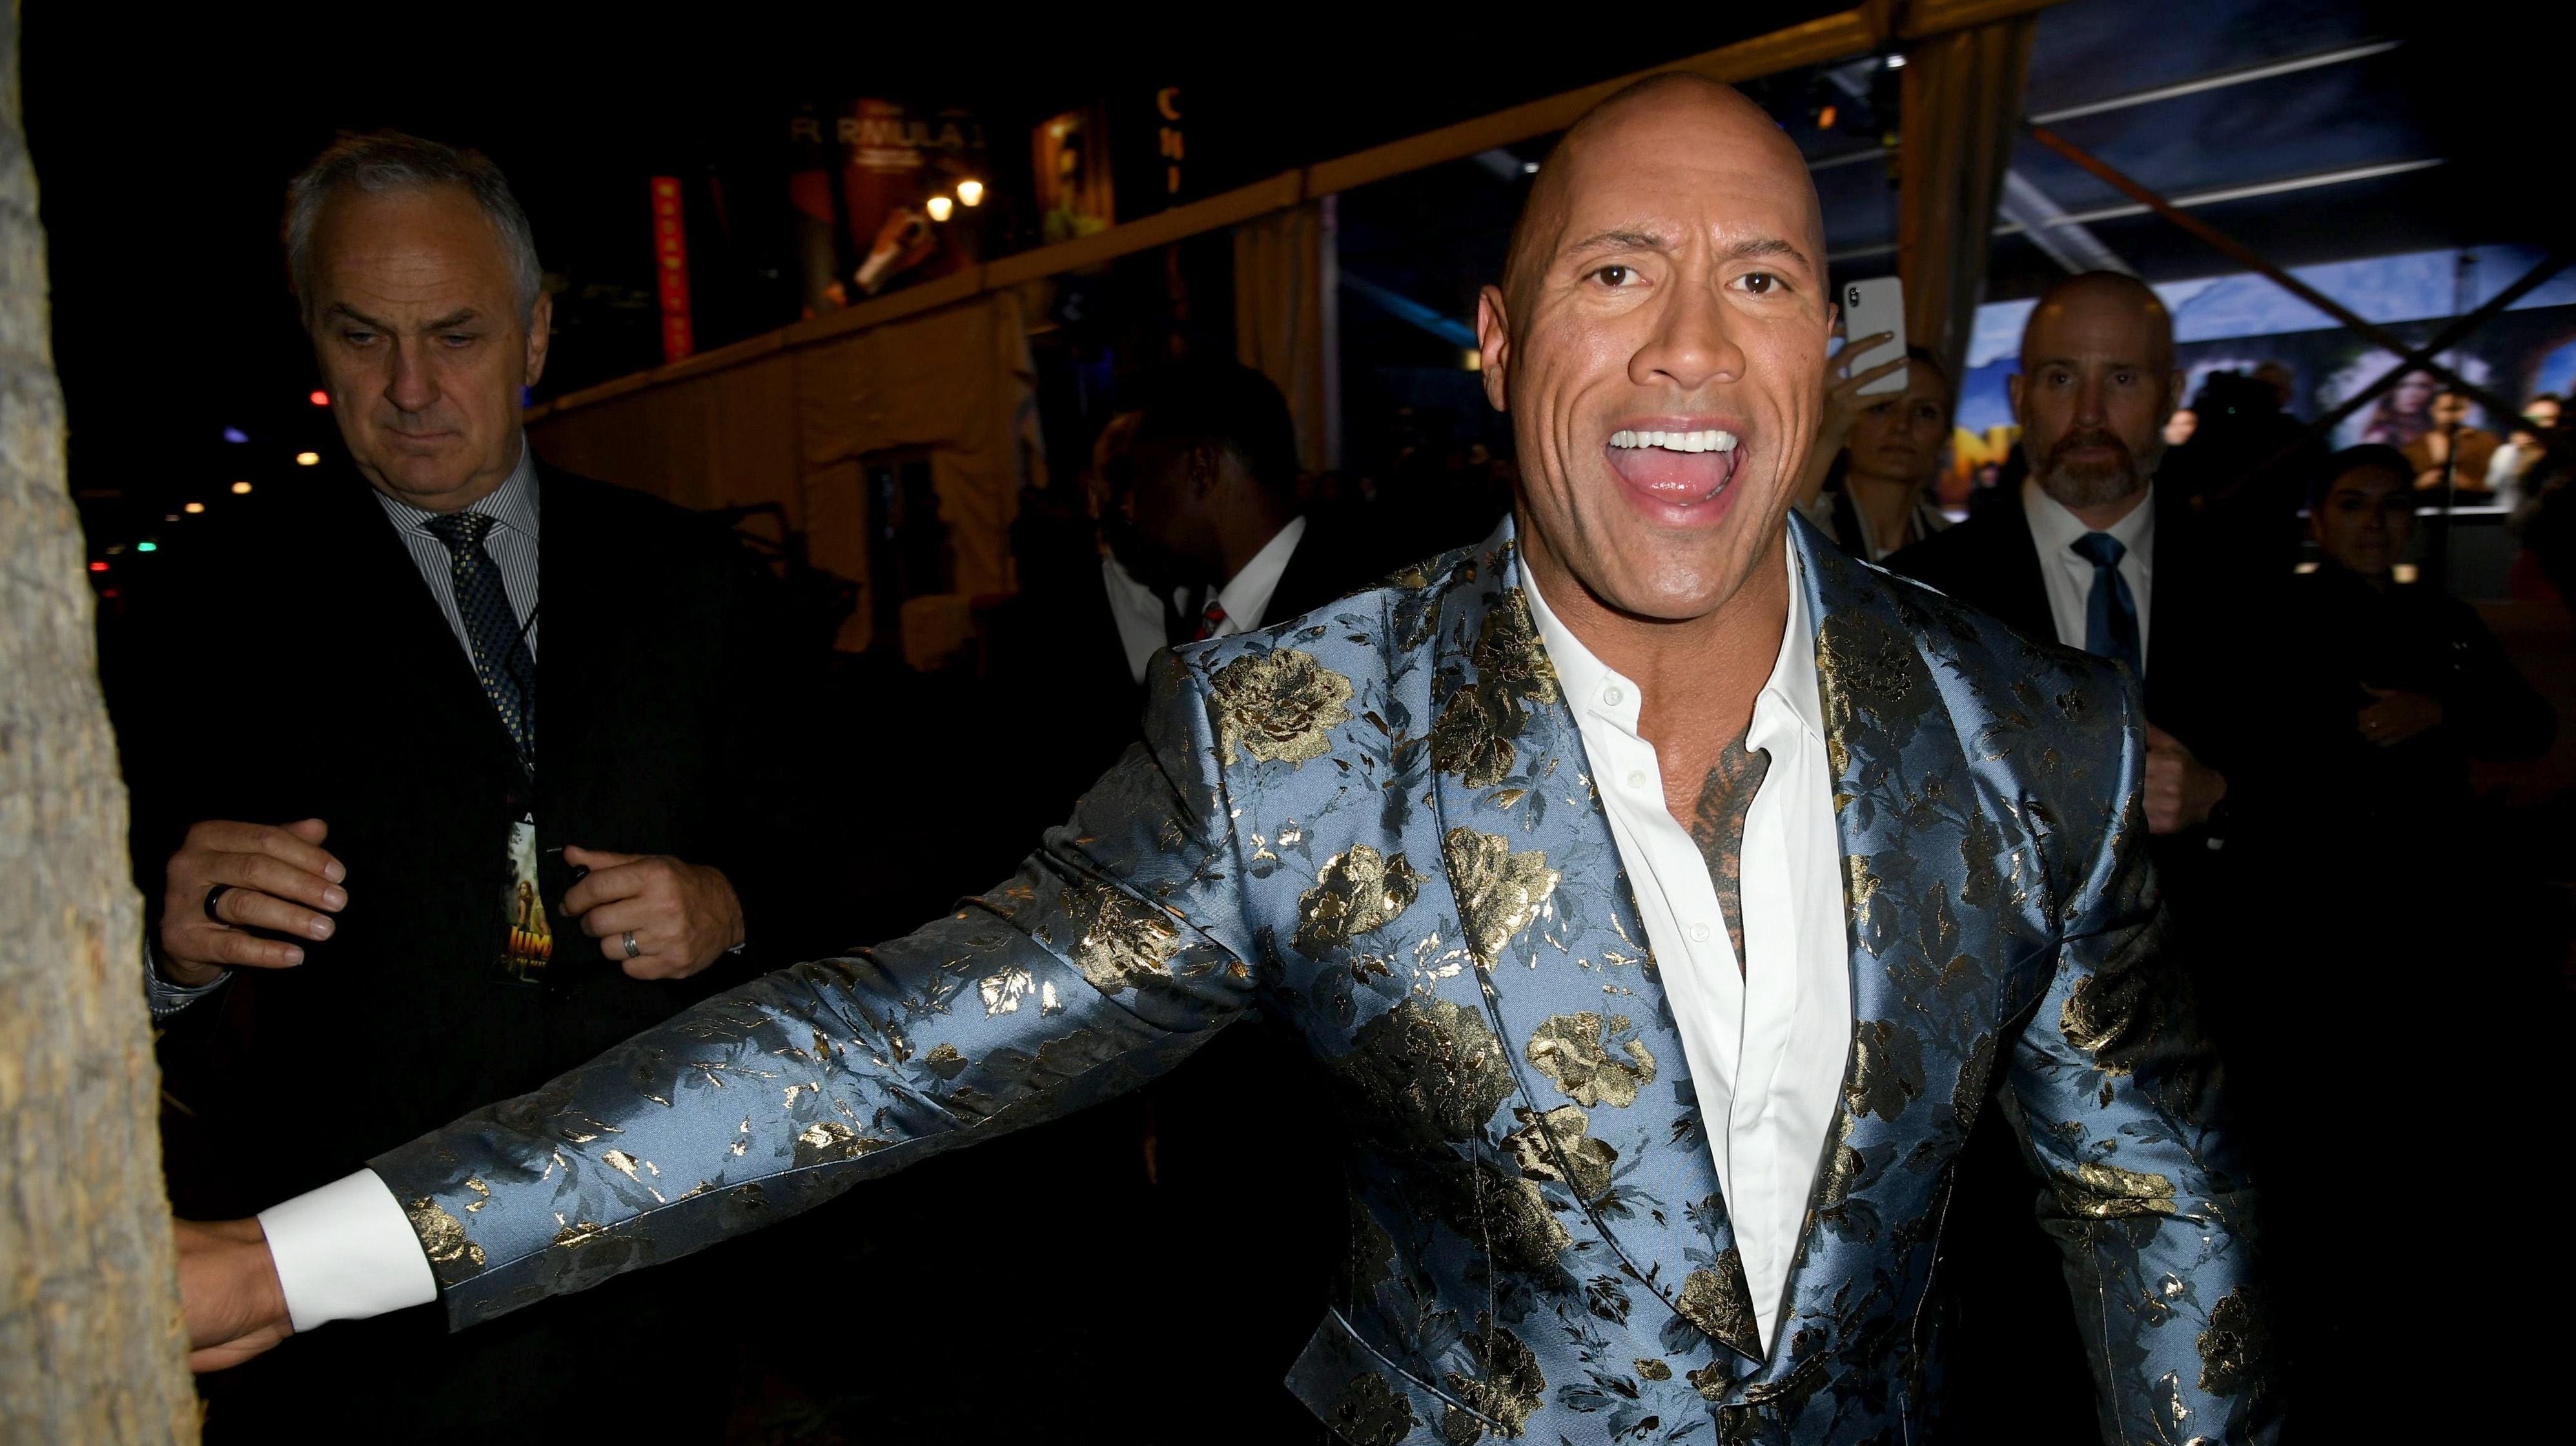 The Rock has released his first rap verse and it is appropriately ridiculous